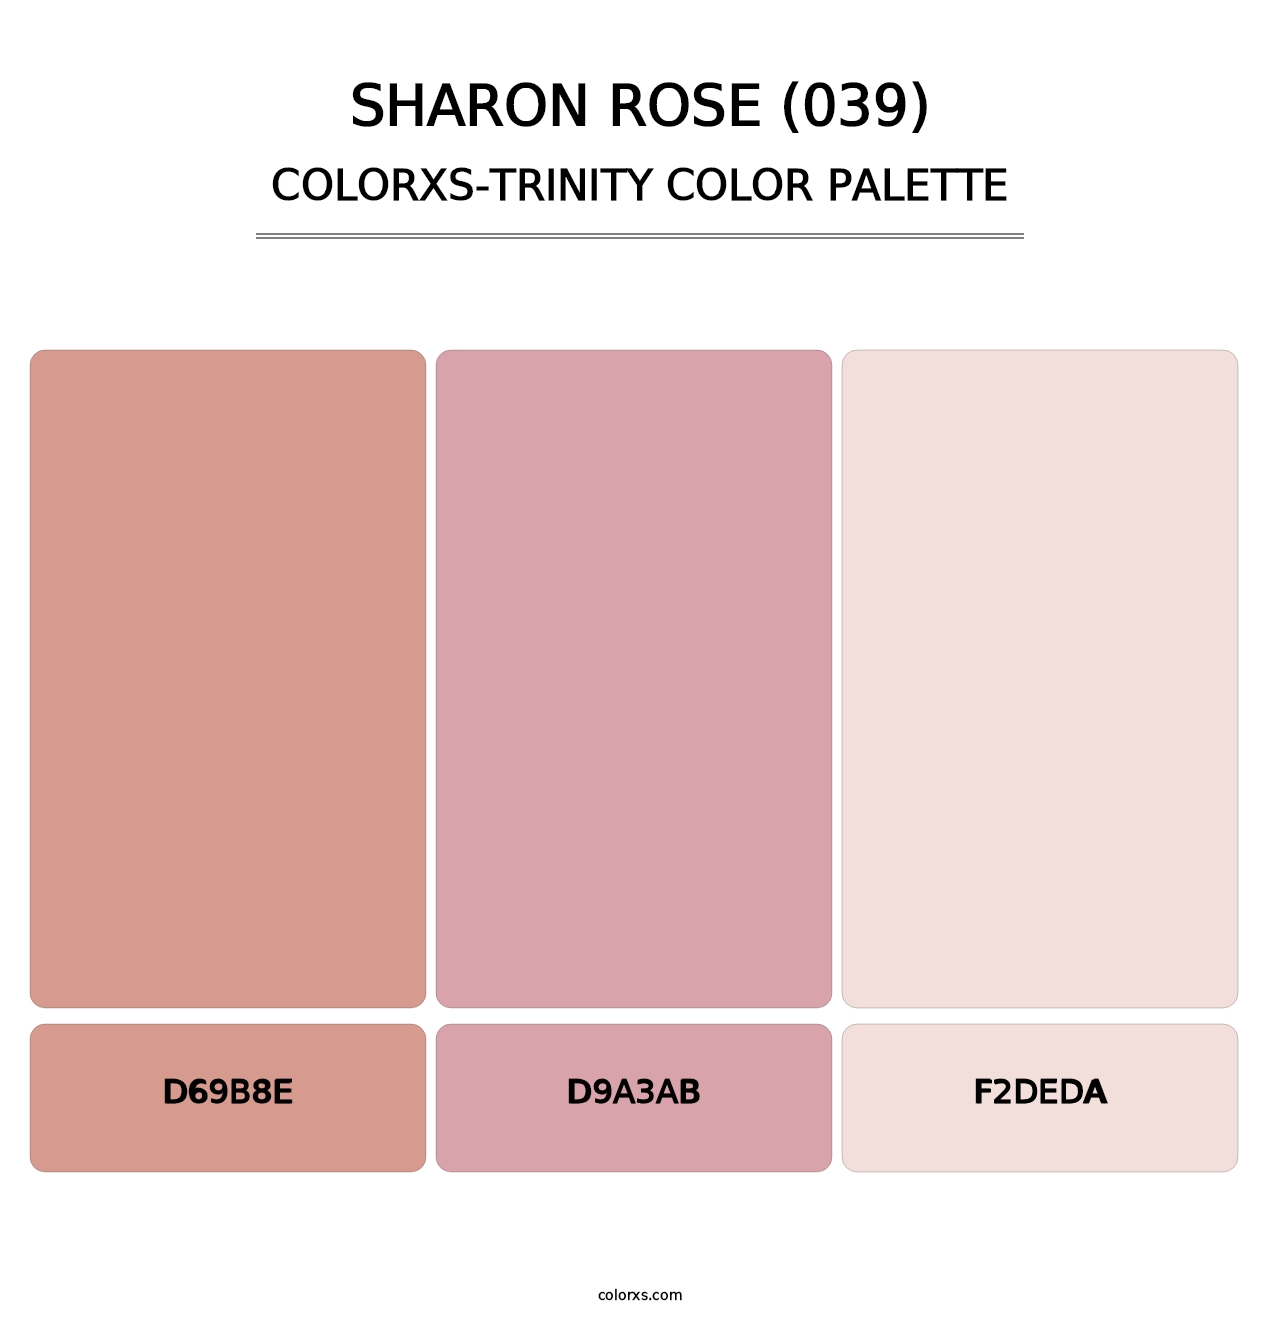 Sharon Rose (039) - Colorxs Trinity Palette